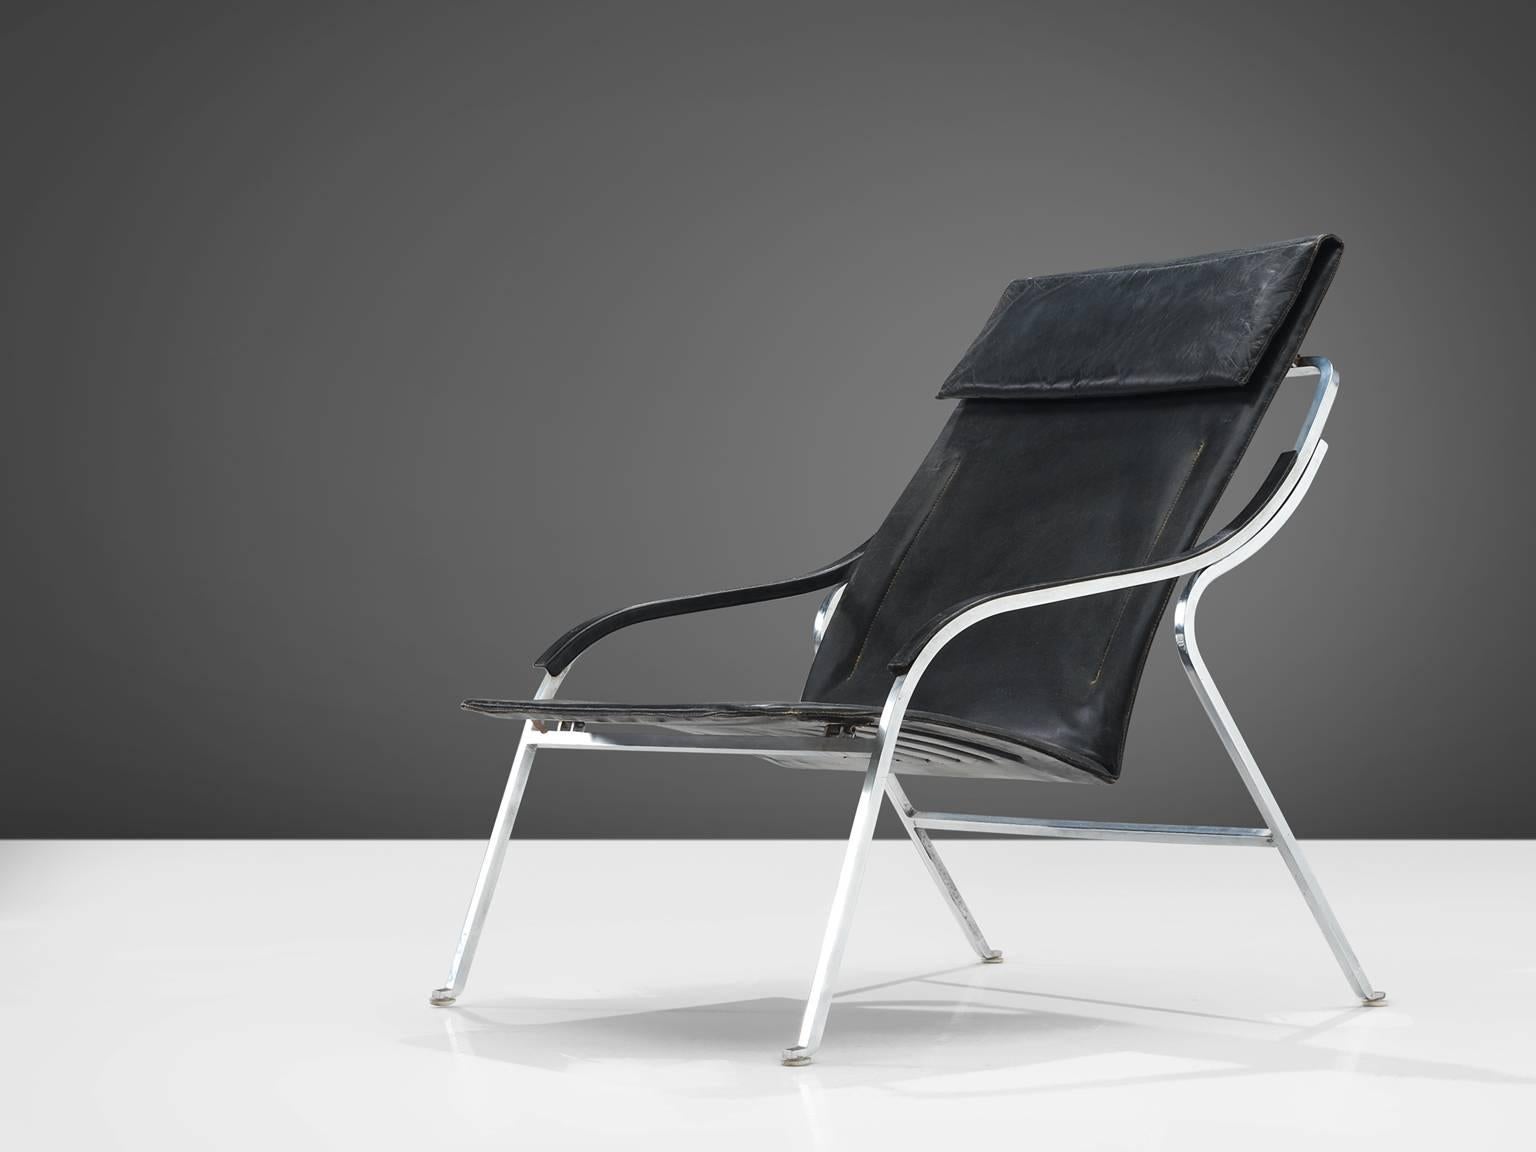 Marco Zanuso for Arflex, fourline lounge chair, black leather and steel, Italy, 1964.

This lounge chair by Zanuso remains among the best examples of armchairs designed by the architect. It is not only the ingenious slender design that distinguishes